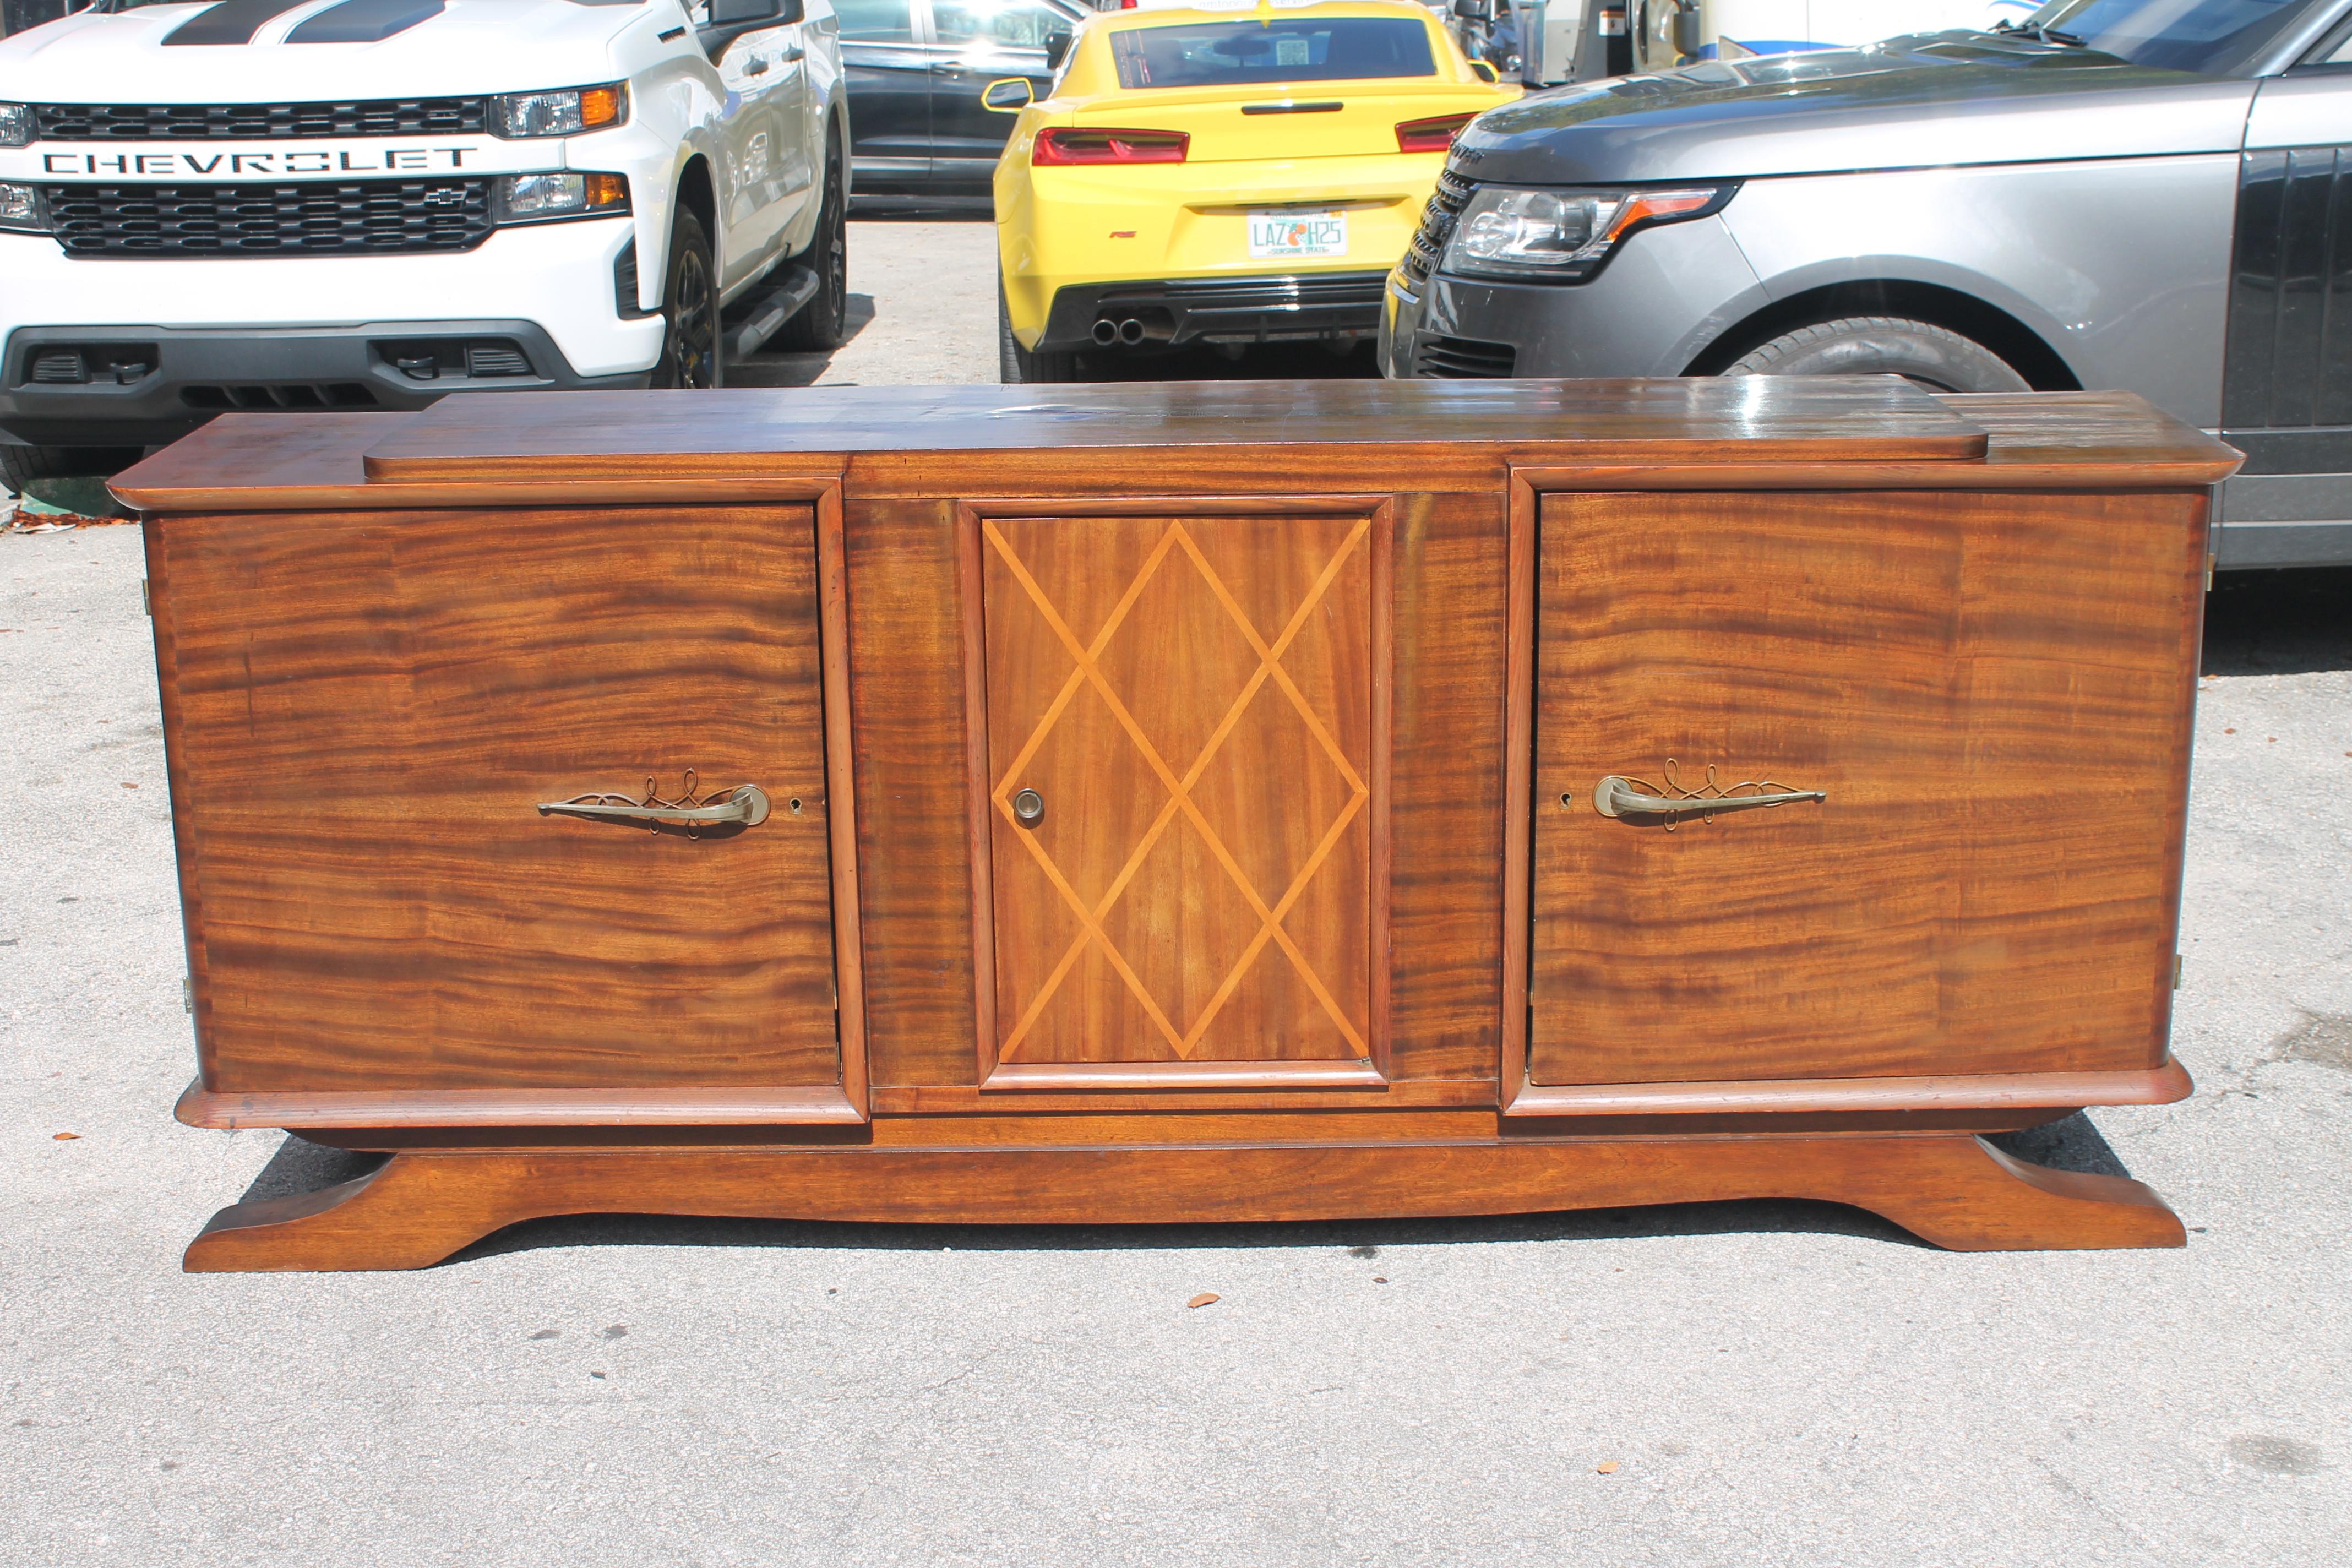 Ultra Classic 1930's French Art Deco Exotic Walnut Buffet/ Sideboard/ Credenza. Hollywood glam here!
Interior finished in Sycamore. This is a beauty!